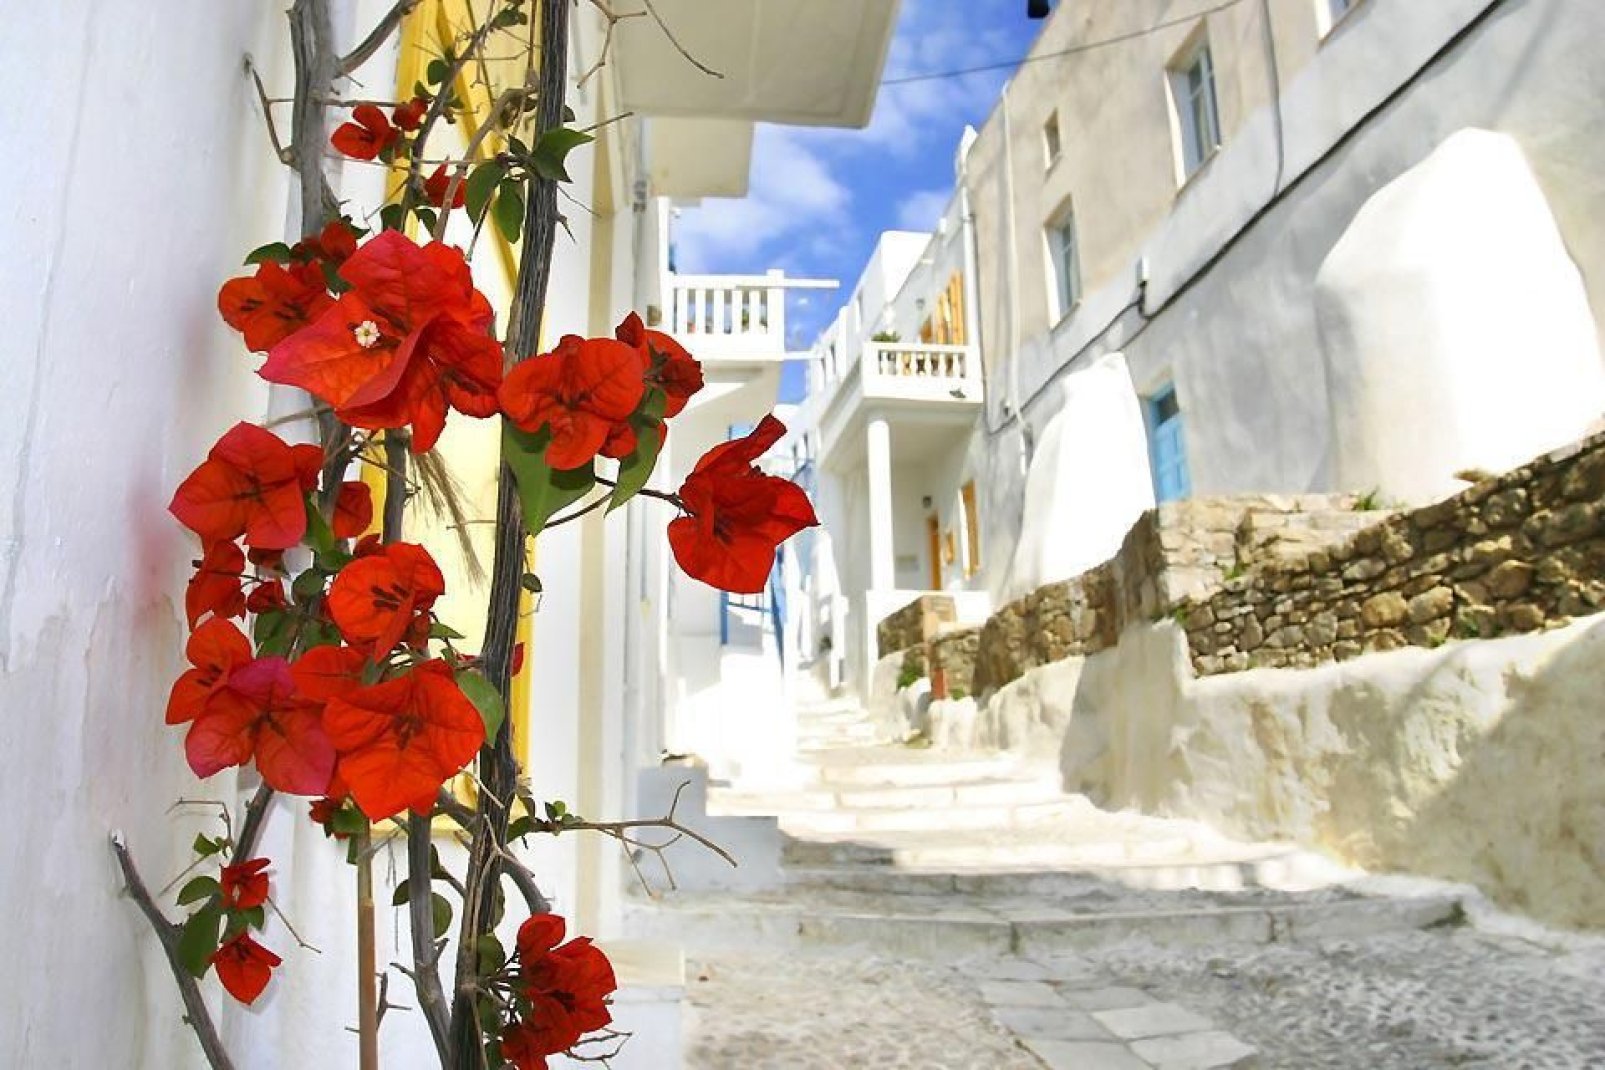 Mykonos can be discovered along its narrow pedestrian streets.